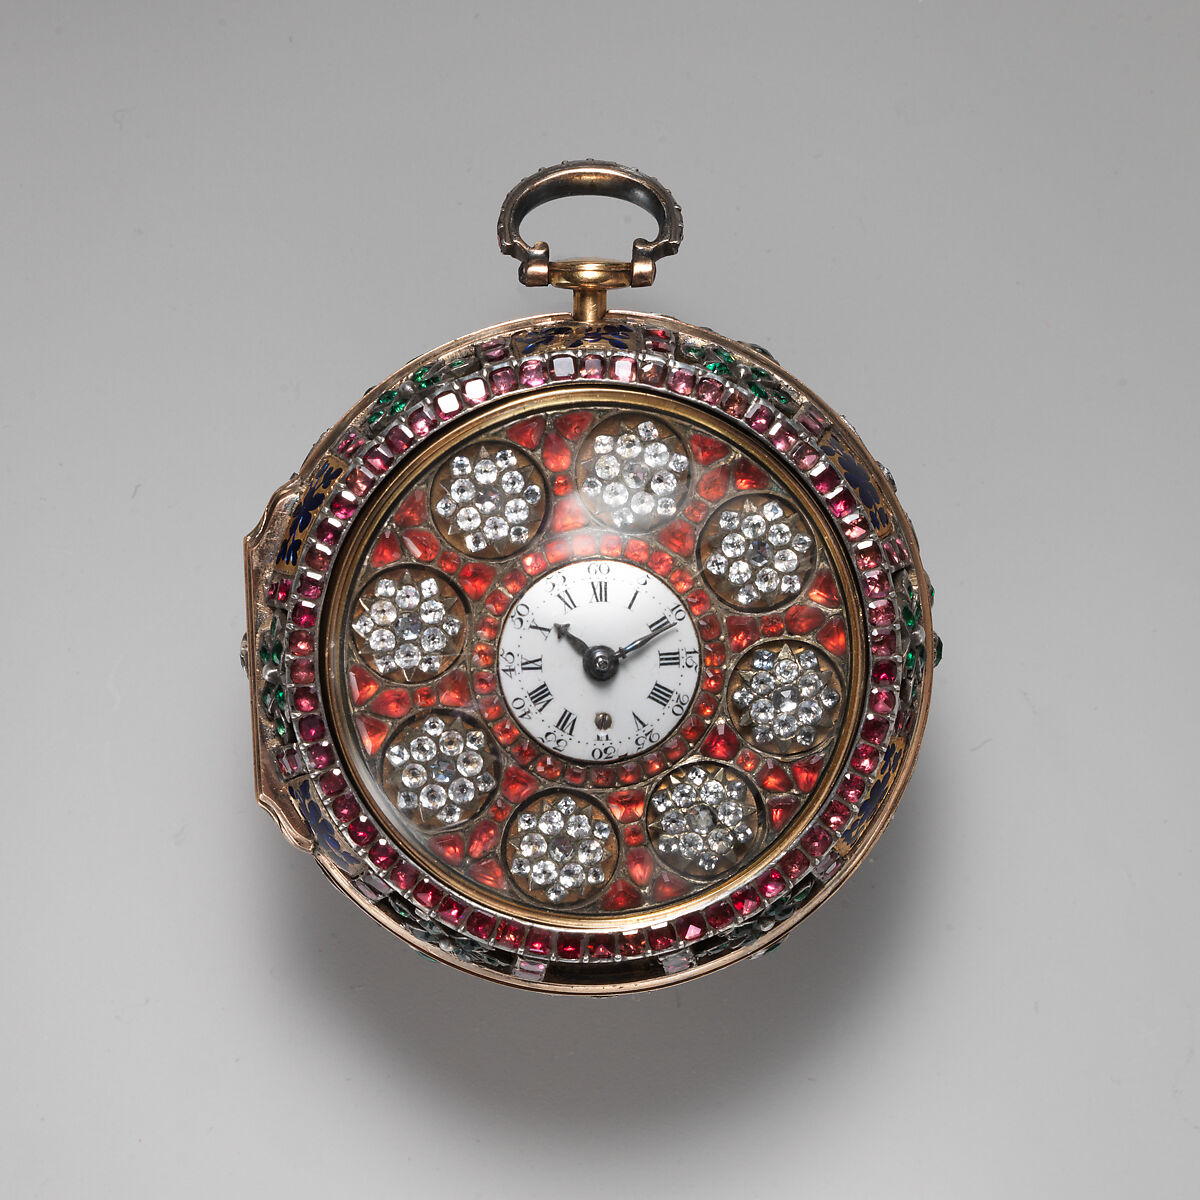 Pair-case automaton watch, James Cox (British, ca. 1723–1800), Outer case: gold, partly enameled and set with gemstones and paste jewels; Inner case: gold; Dial: white enamel, with frame set with paste jewels; Movement: with diamond endstone, British, London 